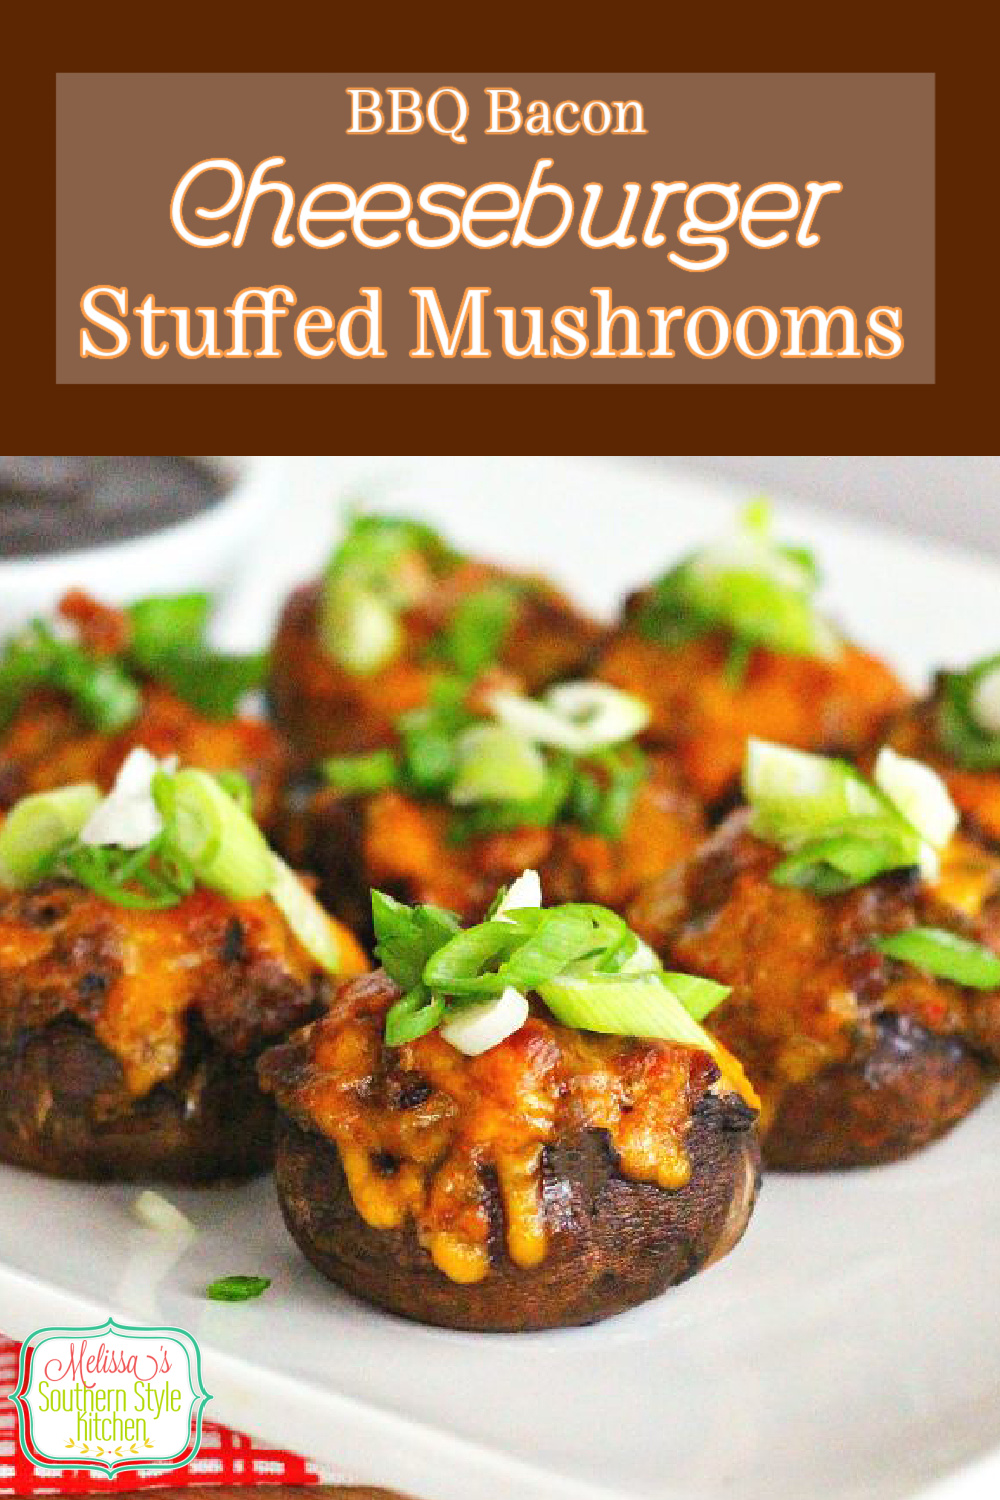 Barbecue Bacon Cheeseburger Stuffed Mushrooms for appetizers and game day snacks #mushrooms #stuffedmushrooms #cheeseburgers #barbecue #baconrecipes #appetizers #tailgating #lowcarb #lowcarbrecipes #southernrecipes #footballfood #superbowlrecipes #melissassouthernstylekitchen